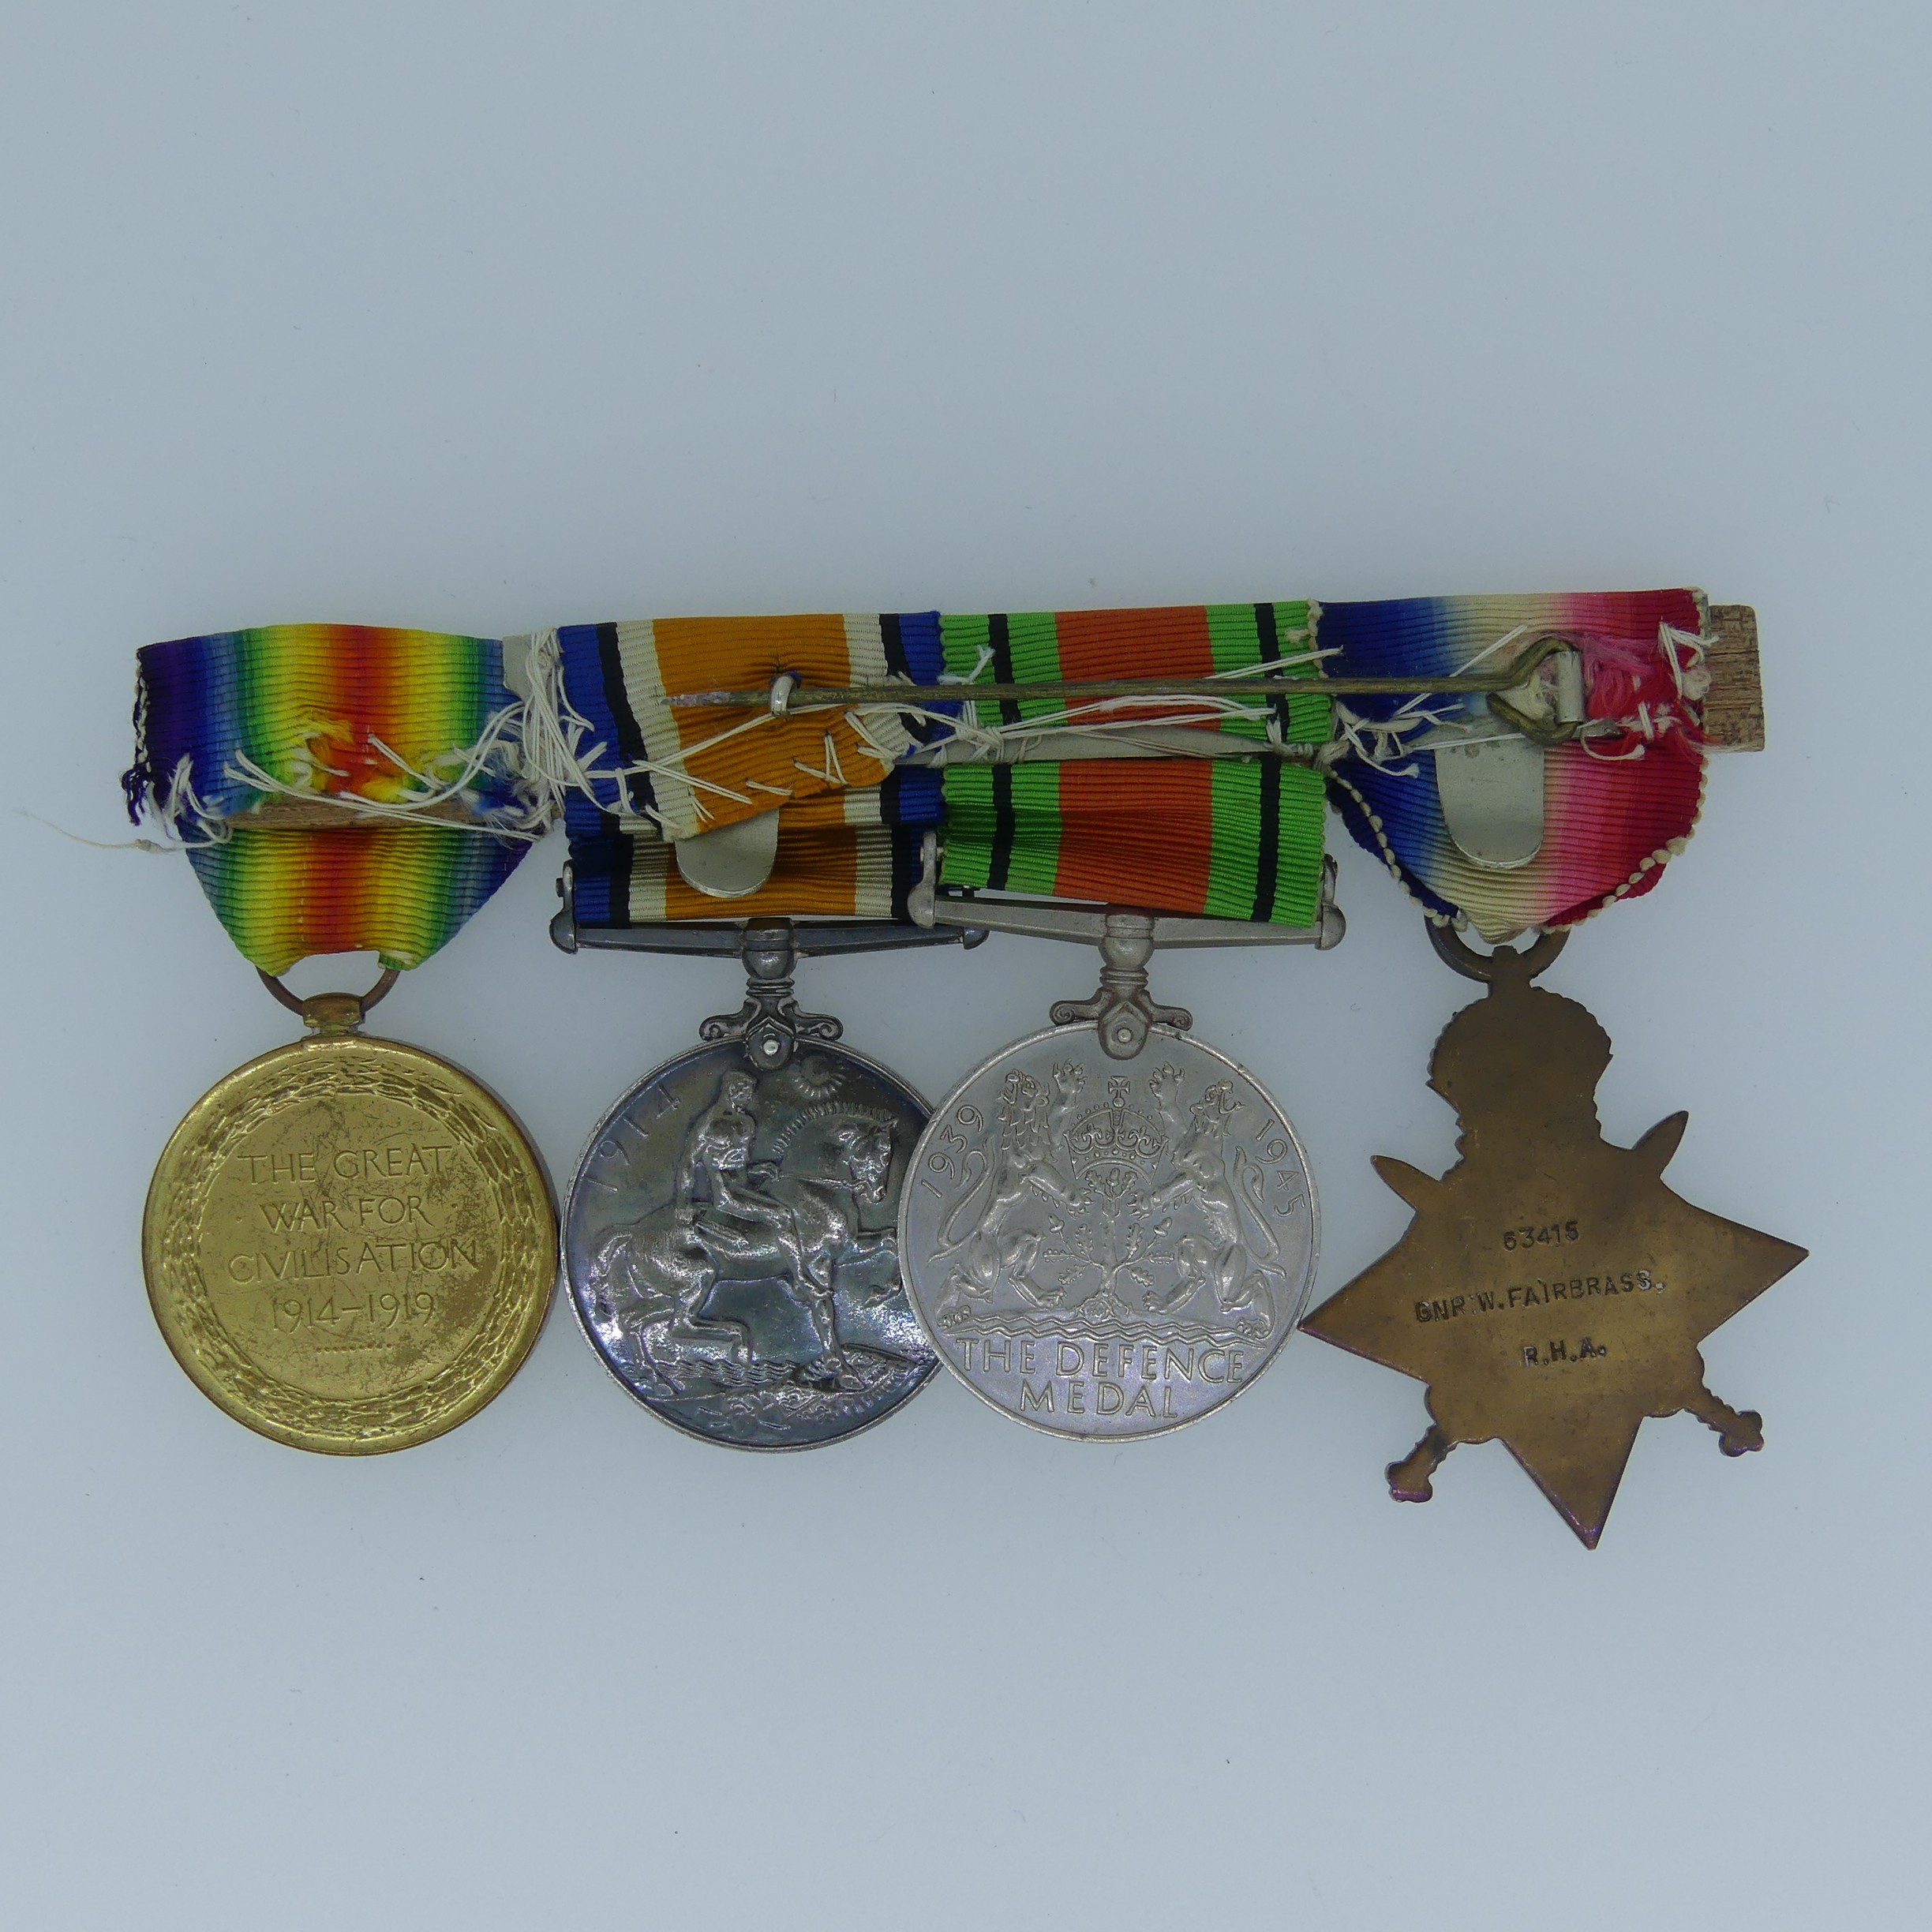 1914 Star Trio and Defence Medal, 63415 Gnr. W. Fairbrass R.H.A (on Star) 63415 Gnr W.H. Fairbrass - Image 2 of 4